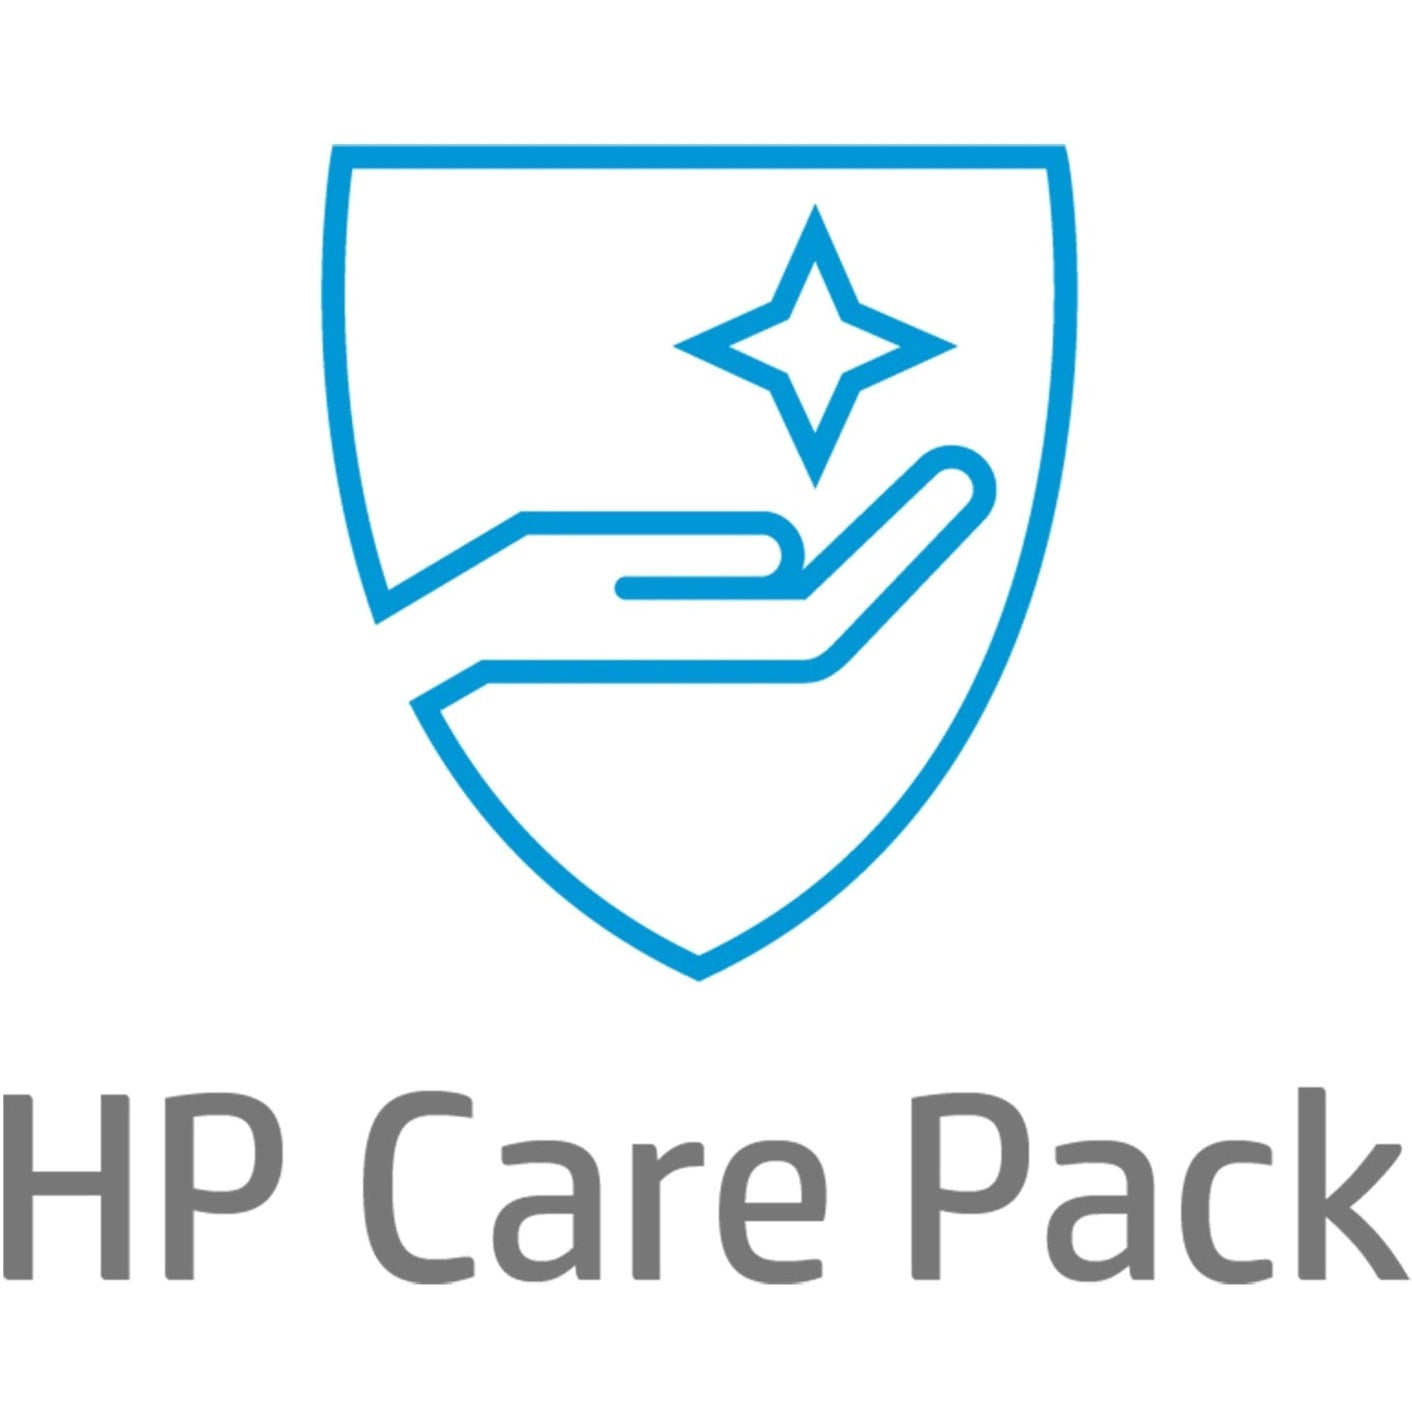 HP Care Pack - Extended Service - 3 Year - Service (UL667E)